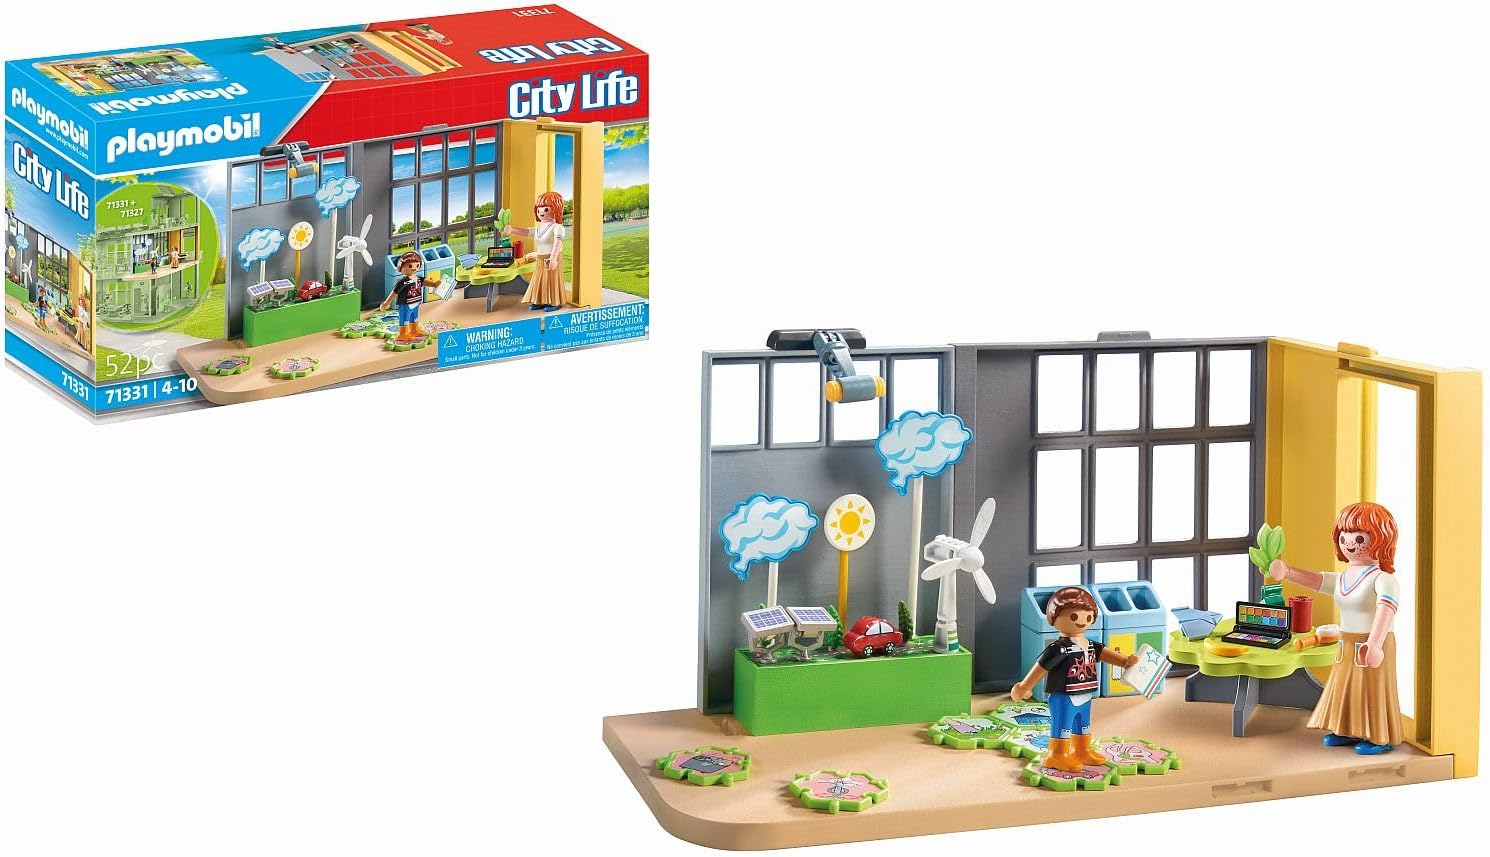 PLAYMOBIL City Life 71331 Cultivation Climate Science, Classroom of the Future, Puzzle with Climate Protection Tasks and More, Toy for Children from 4 Years